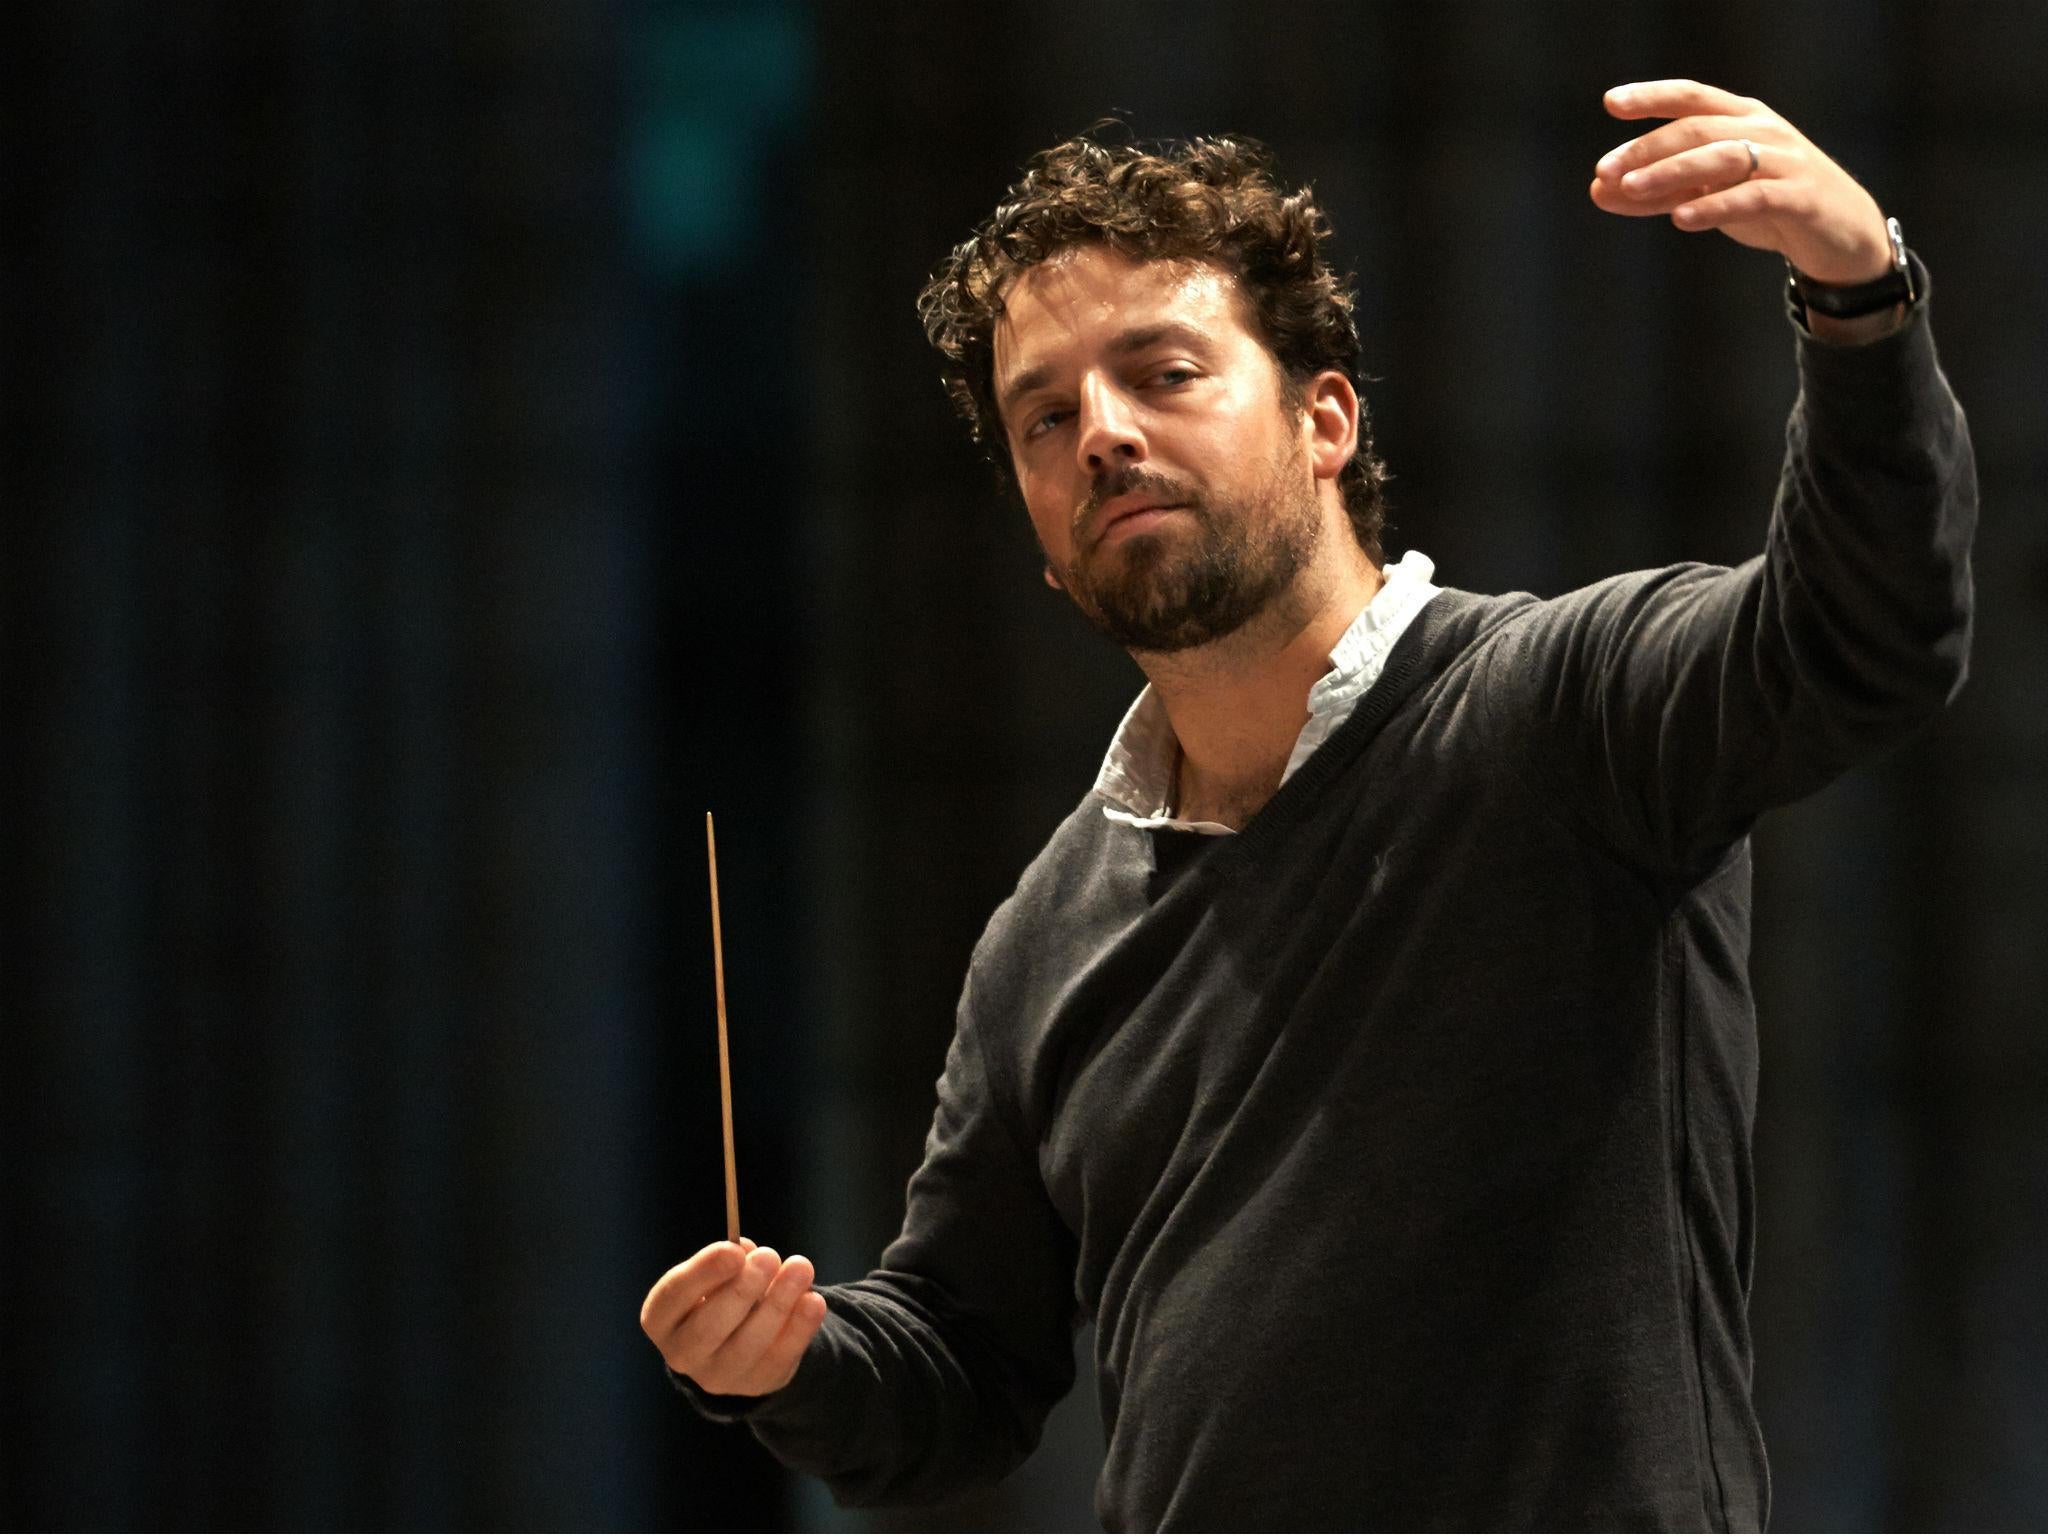 James Gaffigan (above) and the BBC Symphony Orchestra performed 'Prom 18' at the Royal Albert Hall